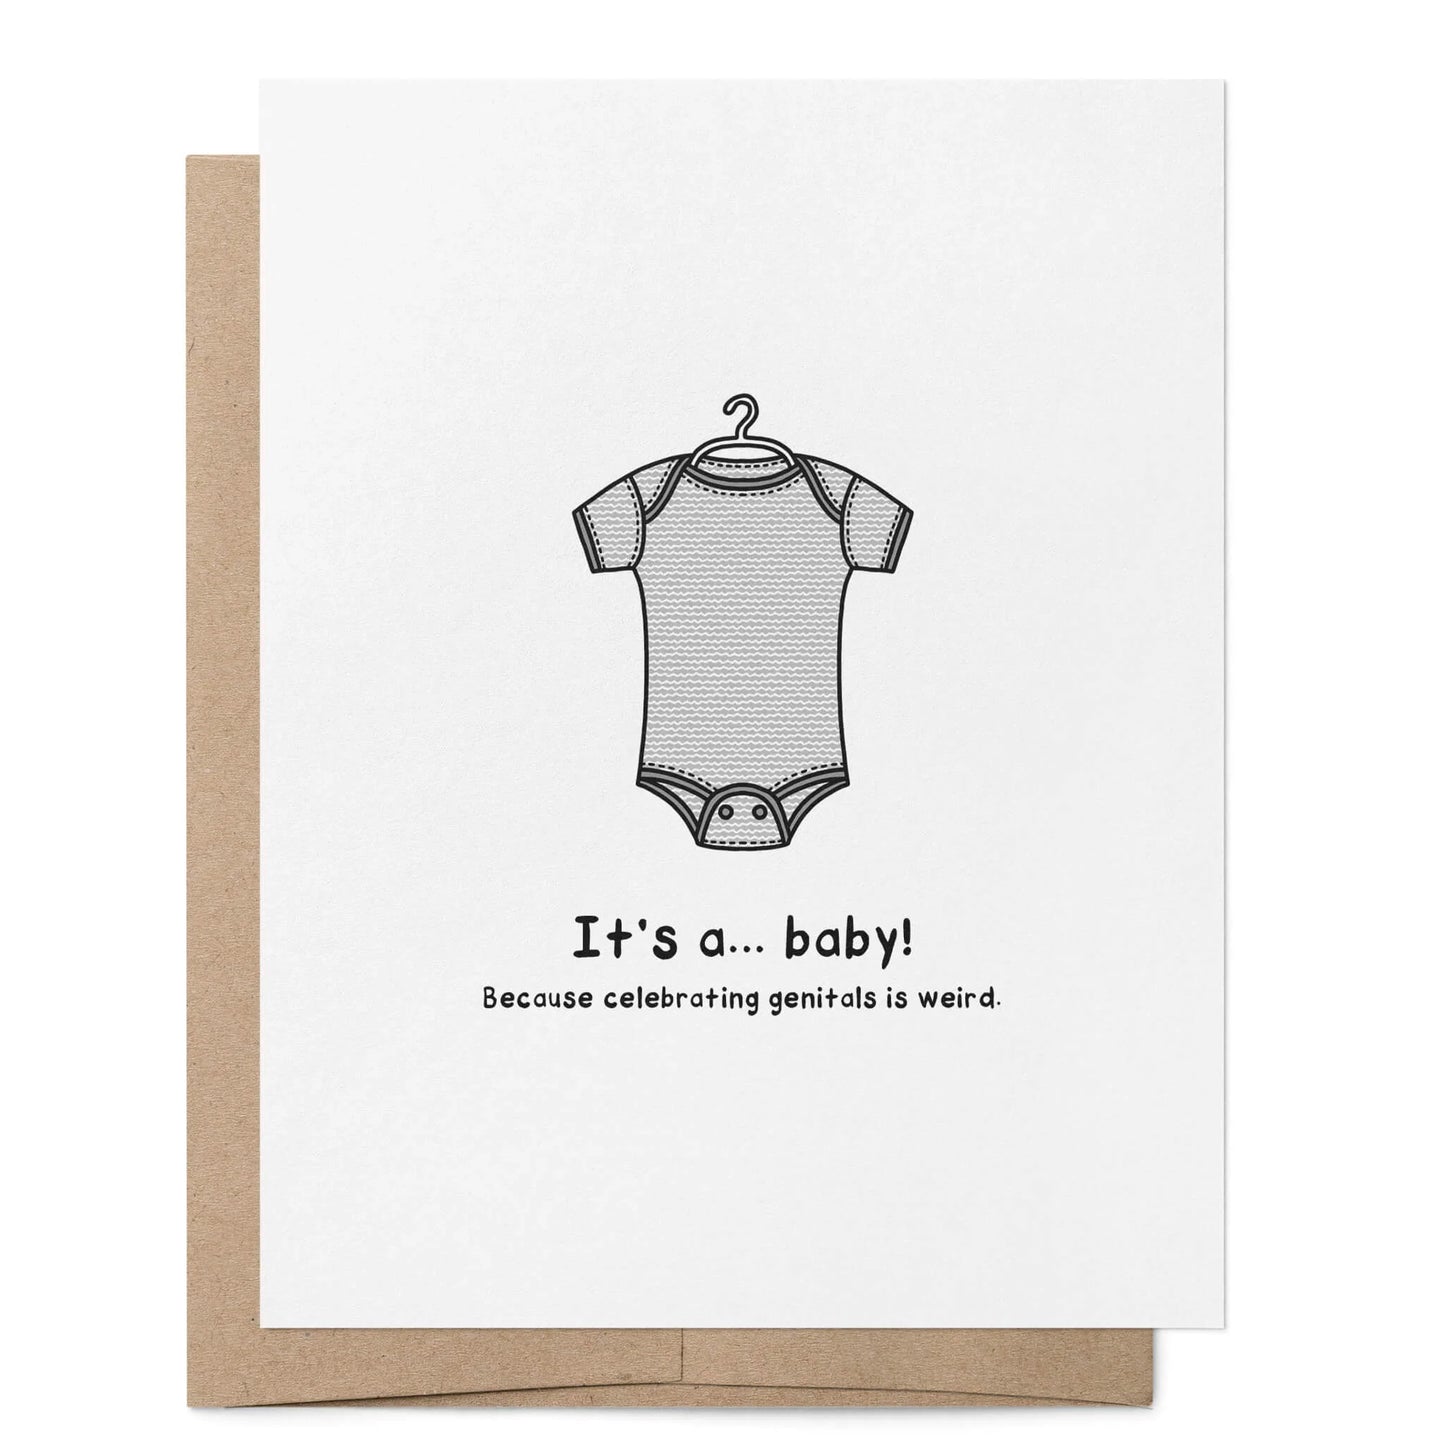 Card: It’s a baby… Because celebrating genitals i weird.